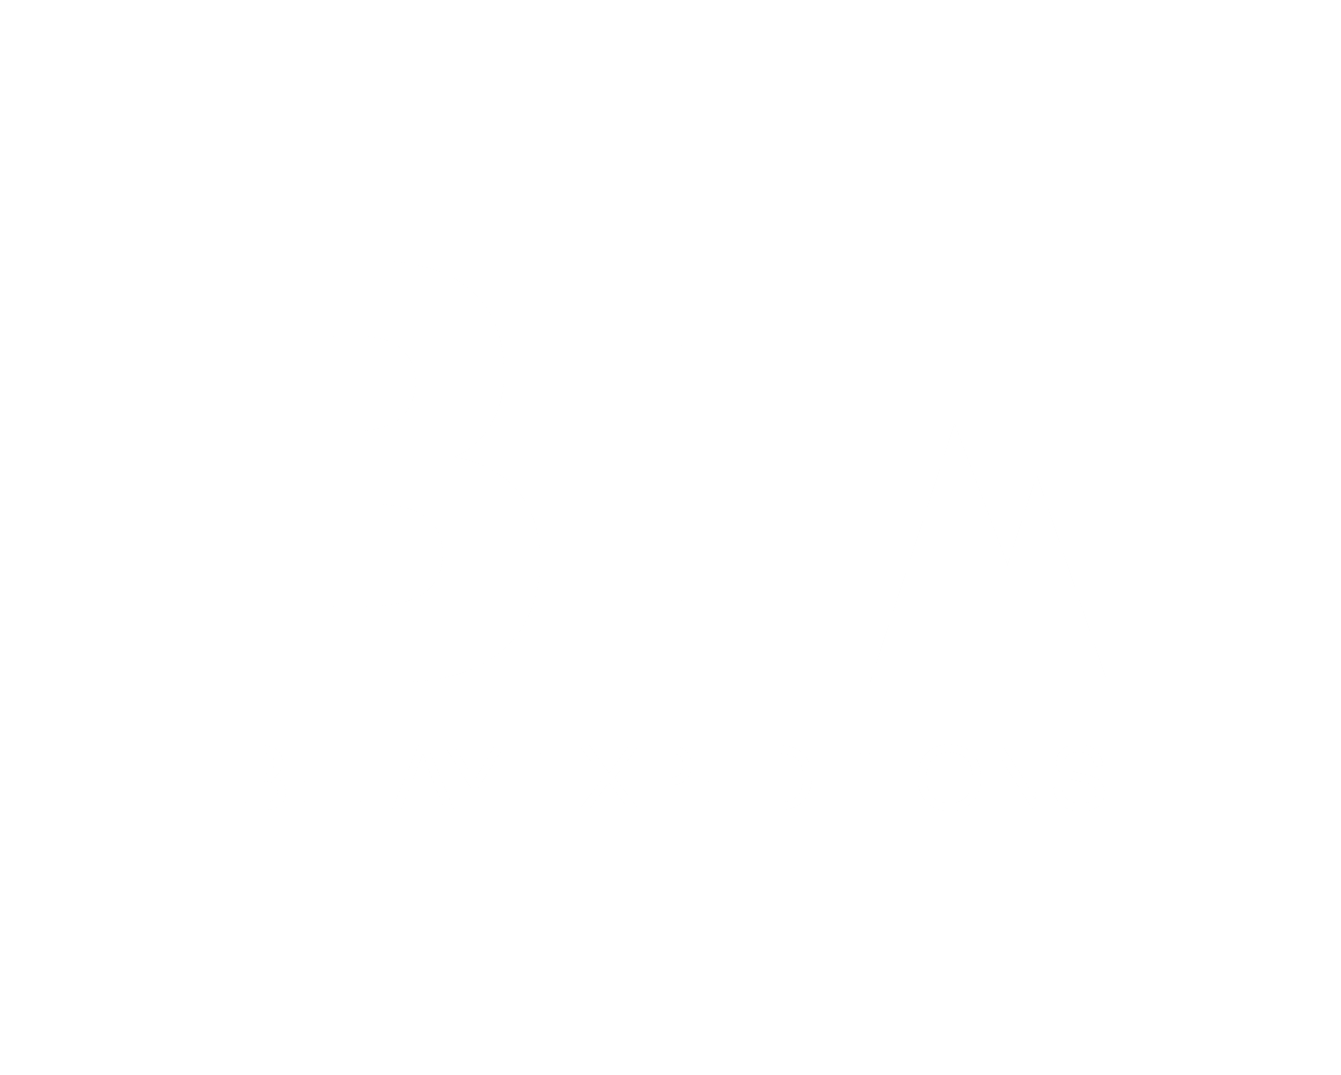 BELAY EXPEDITIONS